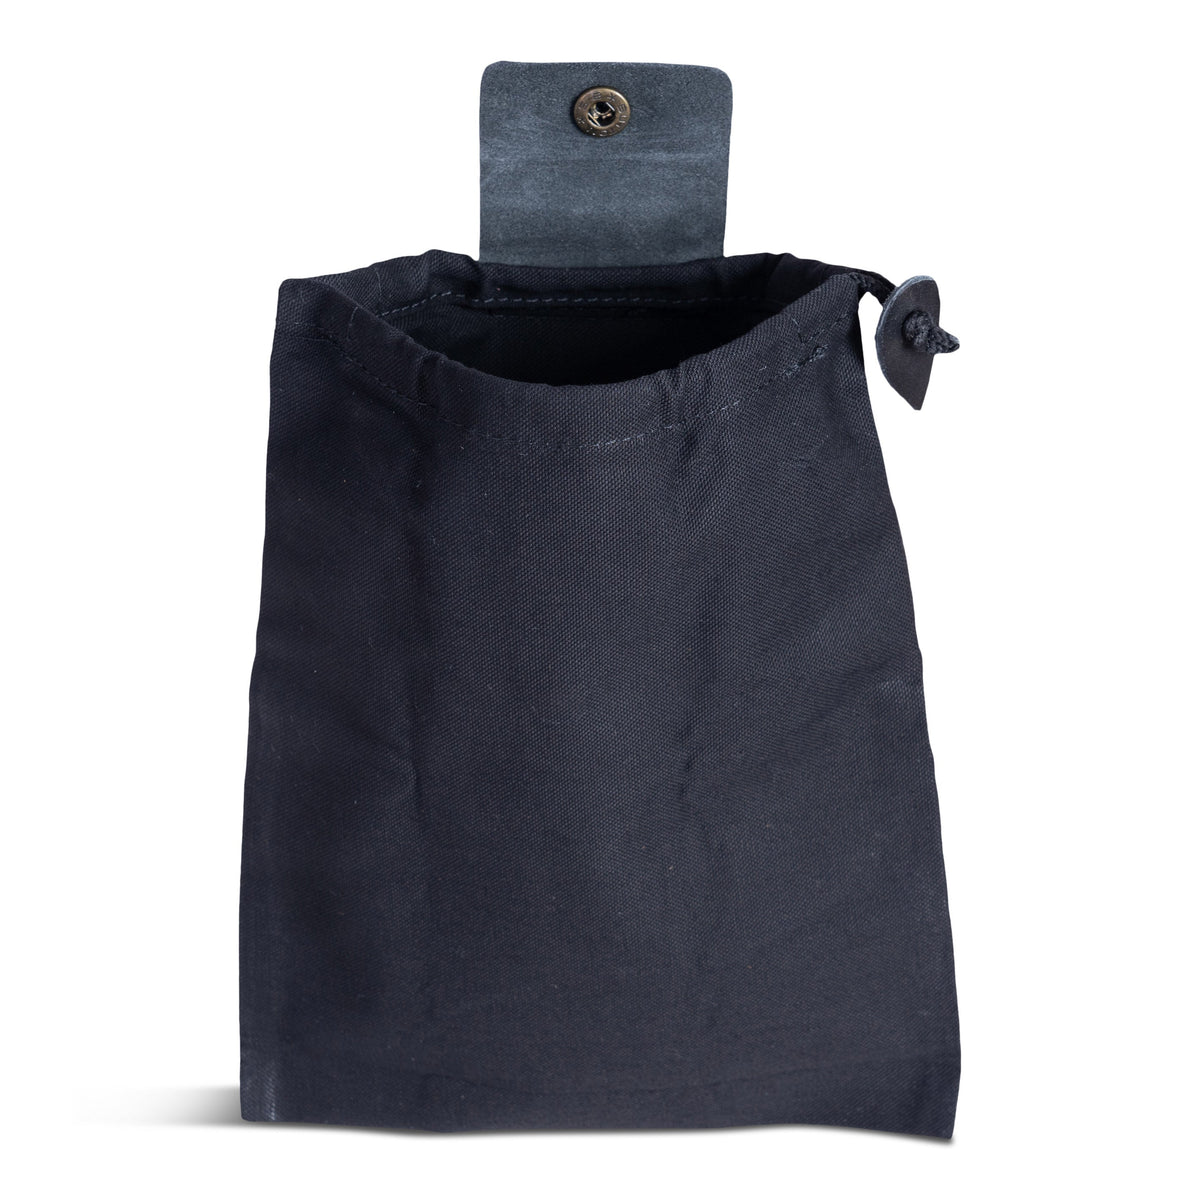 Fantastic Foraging Pouch - Black Cover